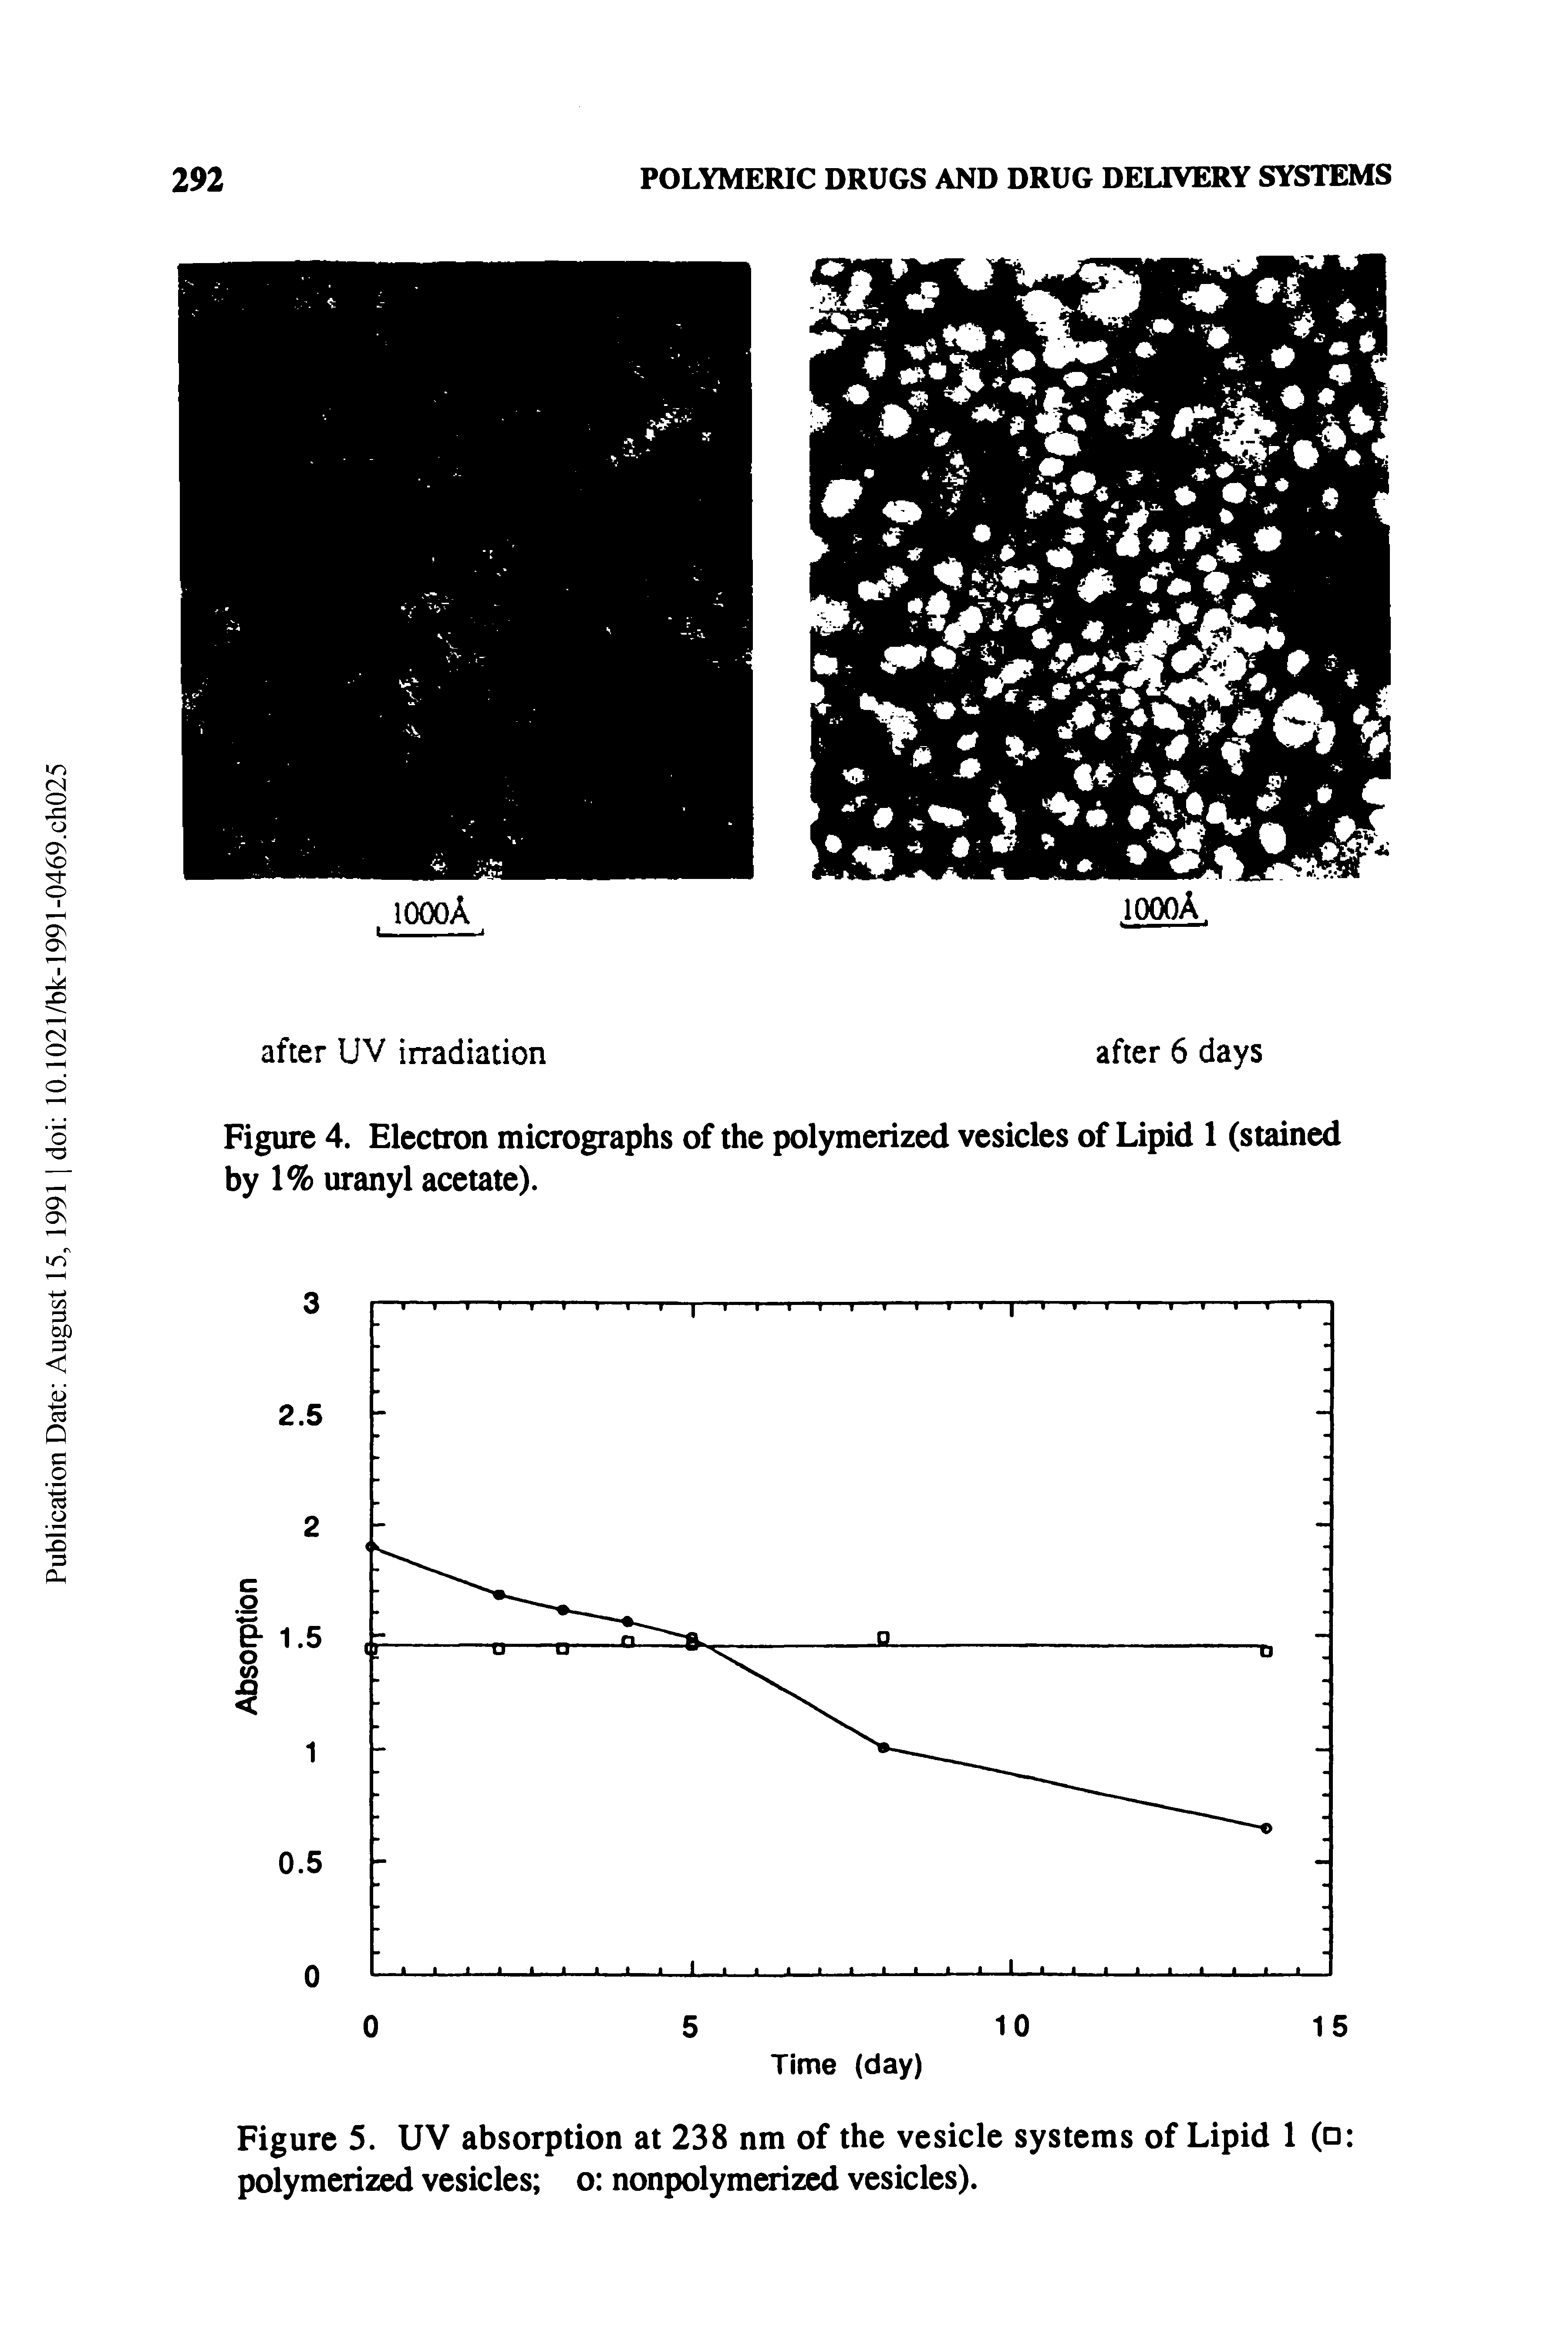 Figure 4. Electron micrographs of the polymerized vesicles of Lipid 1 (stained by 1% uranyl acetate).